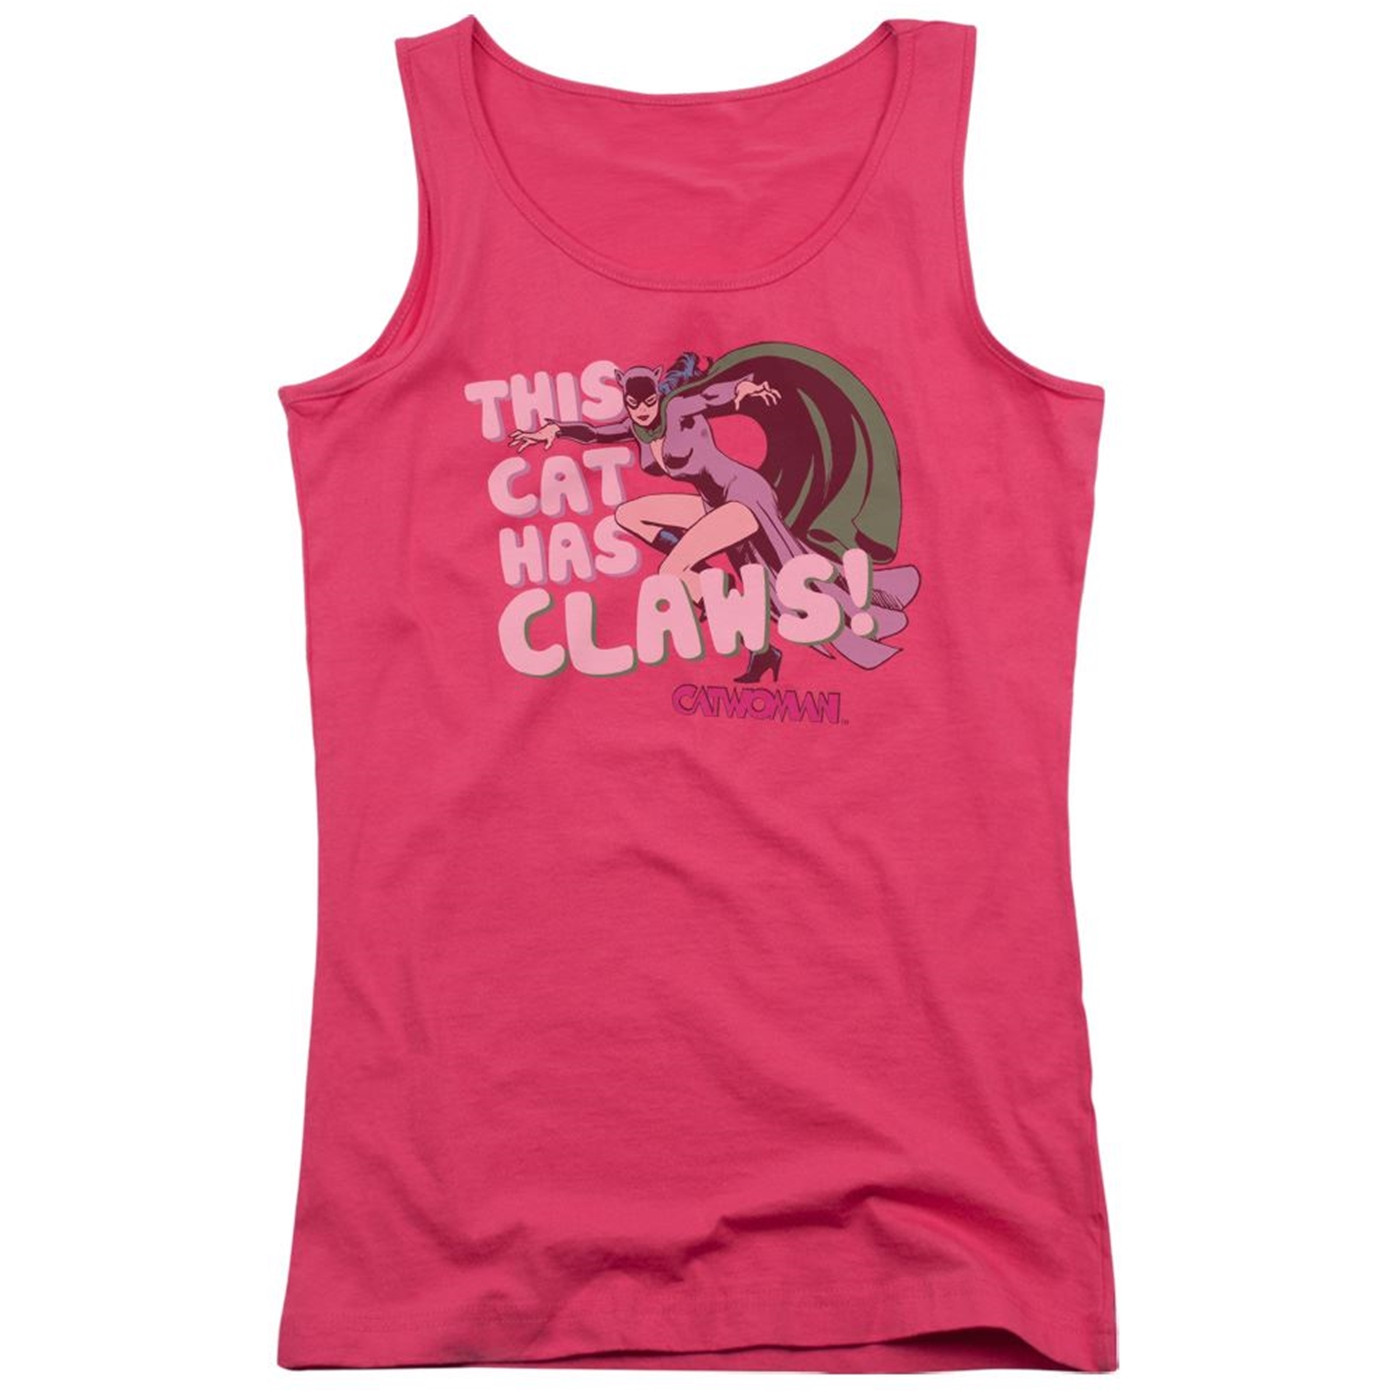 Catwoman Claws Women's Tank Top